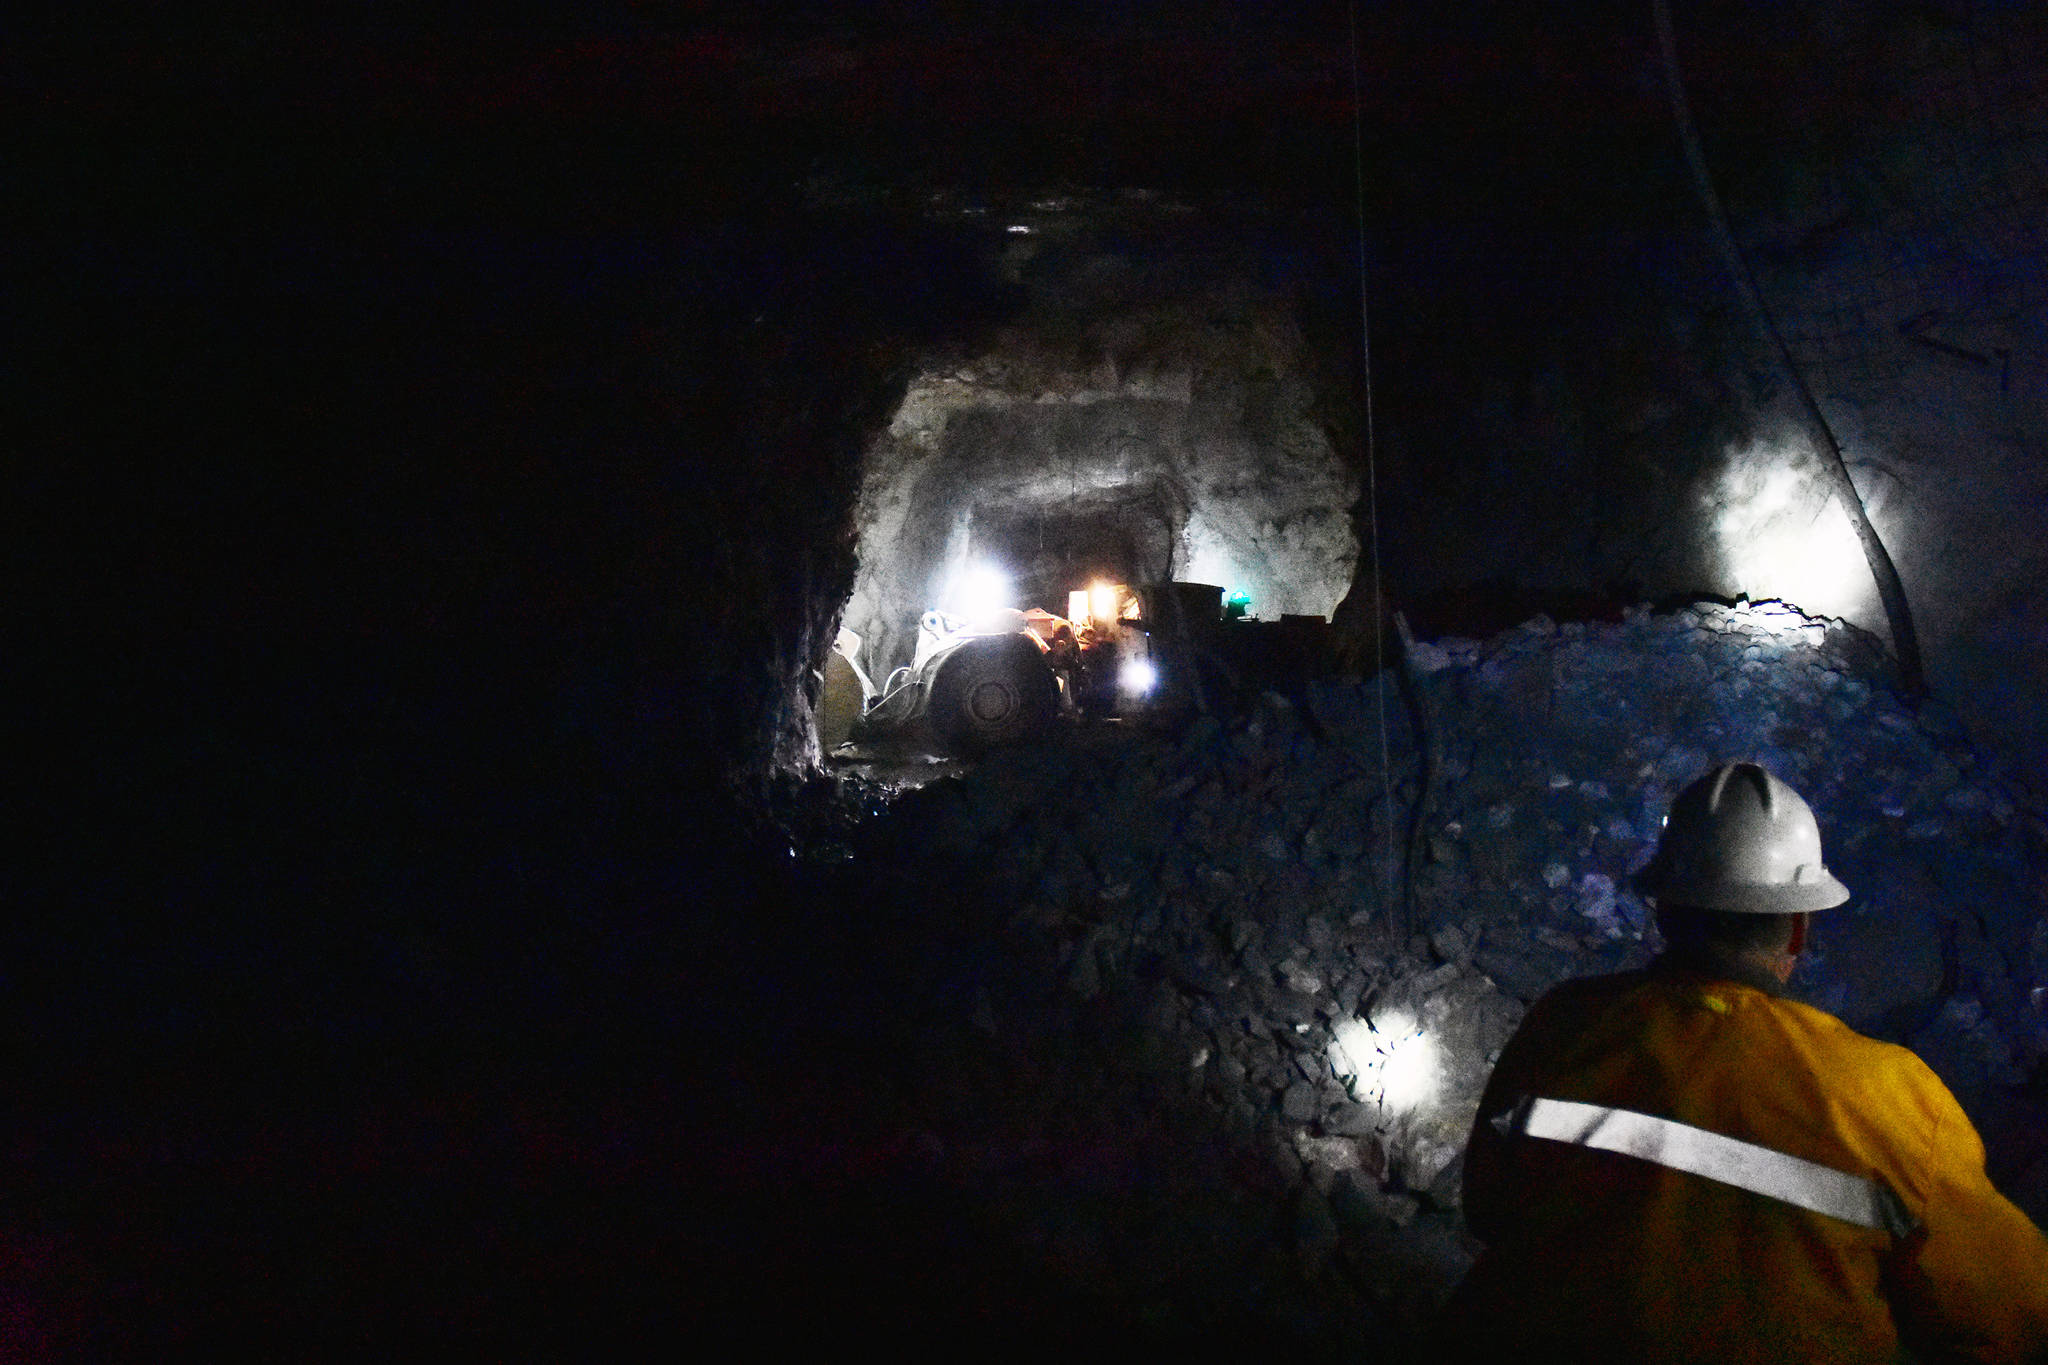 Workers inside the Kensington Gold Mine on Monday, Oct. 14, 2019. (Peter Segall | Juneau Empire)                                Workers inside the Kensington Gold Mine on Monday, Oct. 14, 2019. (Peter Segall | Juneau Empire)